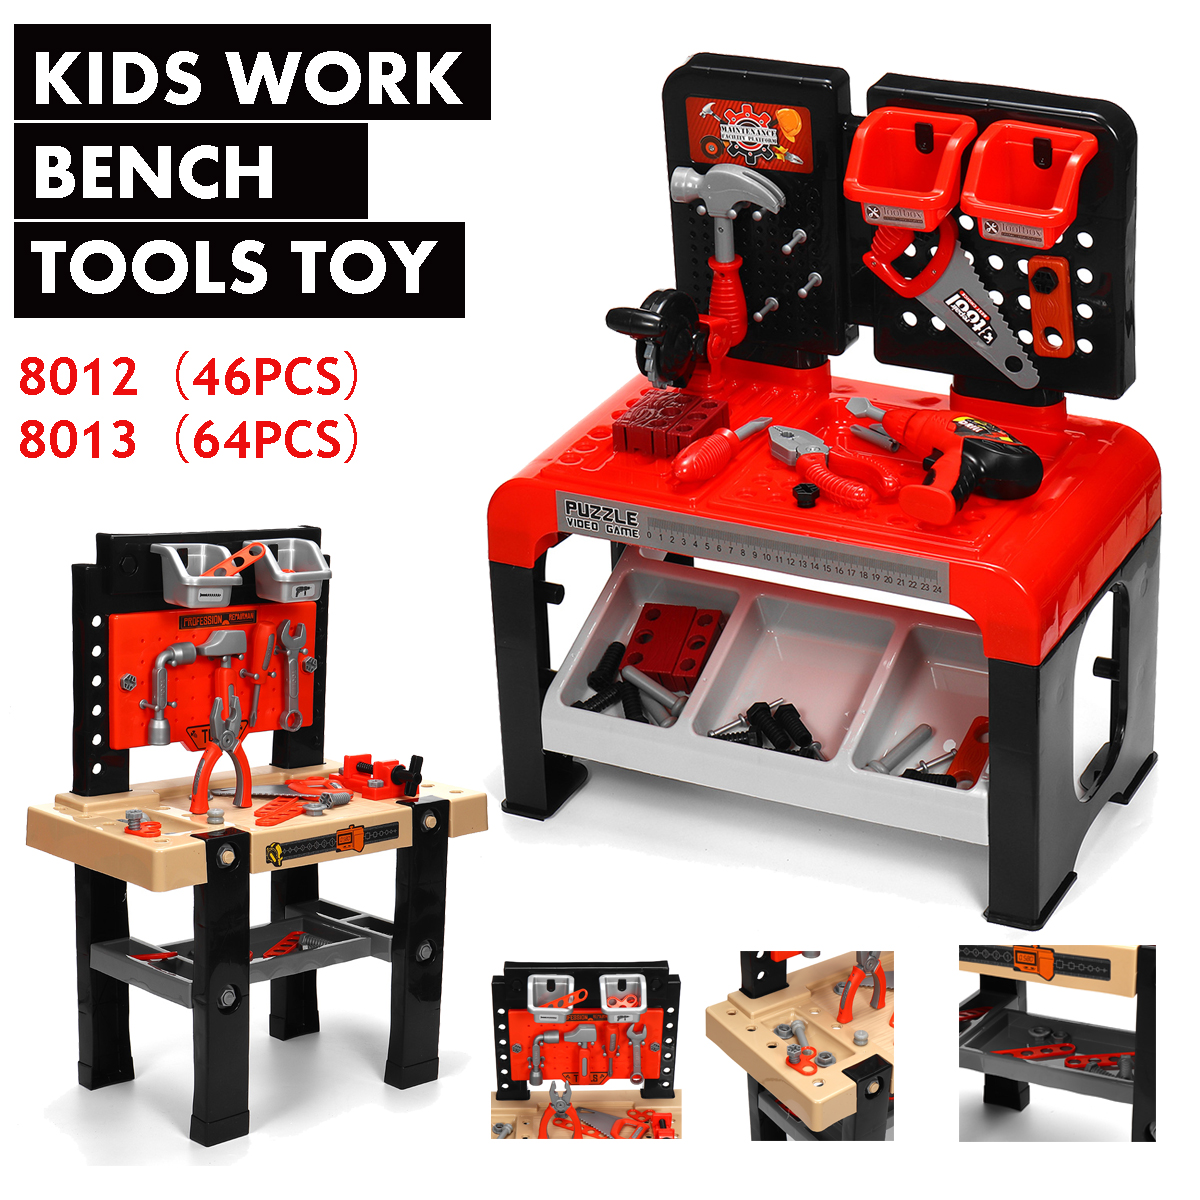 4664-Pcs-2-Tiers-Simulation-Work-Bench-Repair-Tools-Early-Educational-Puzzle-Toy-with-2-Upper-Storag-1805315-2